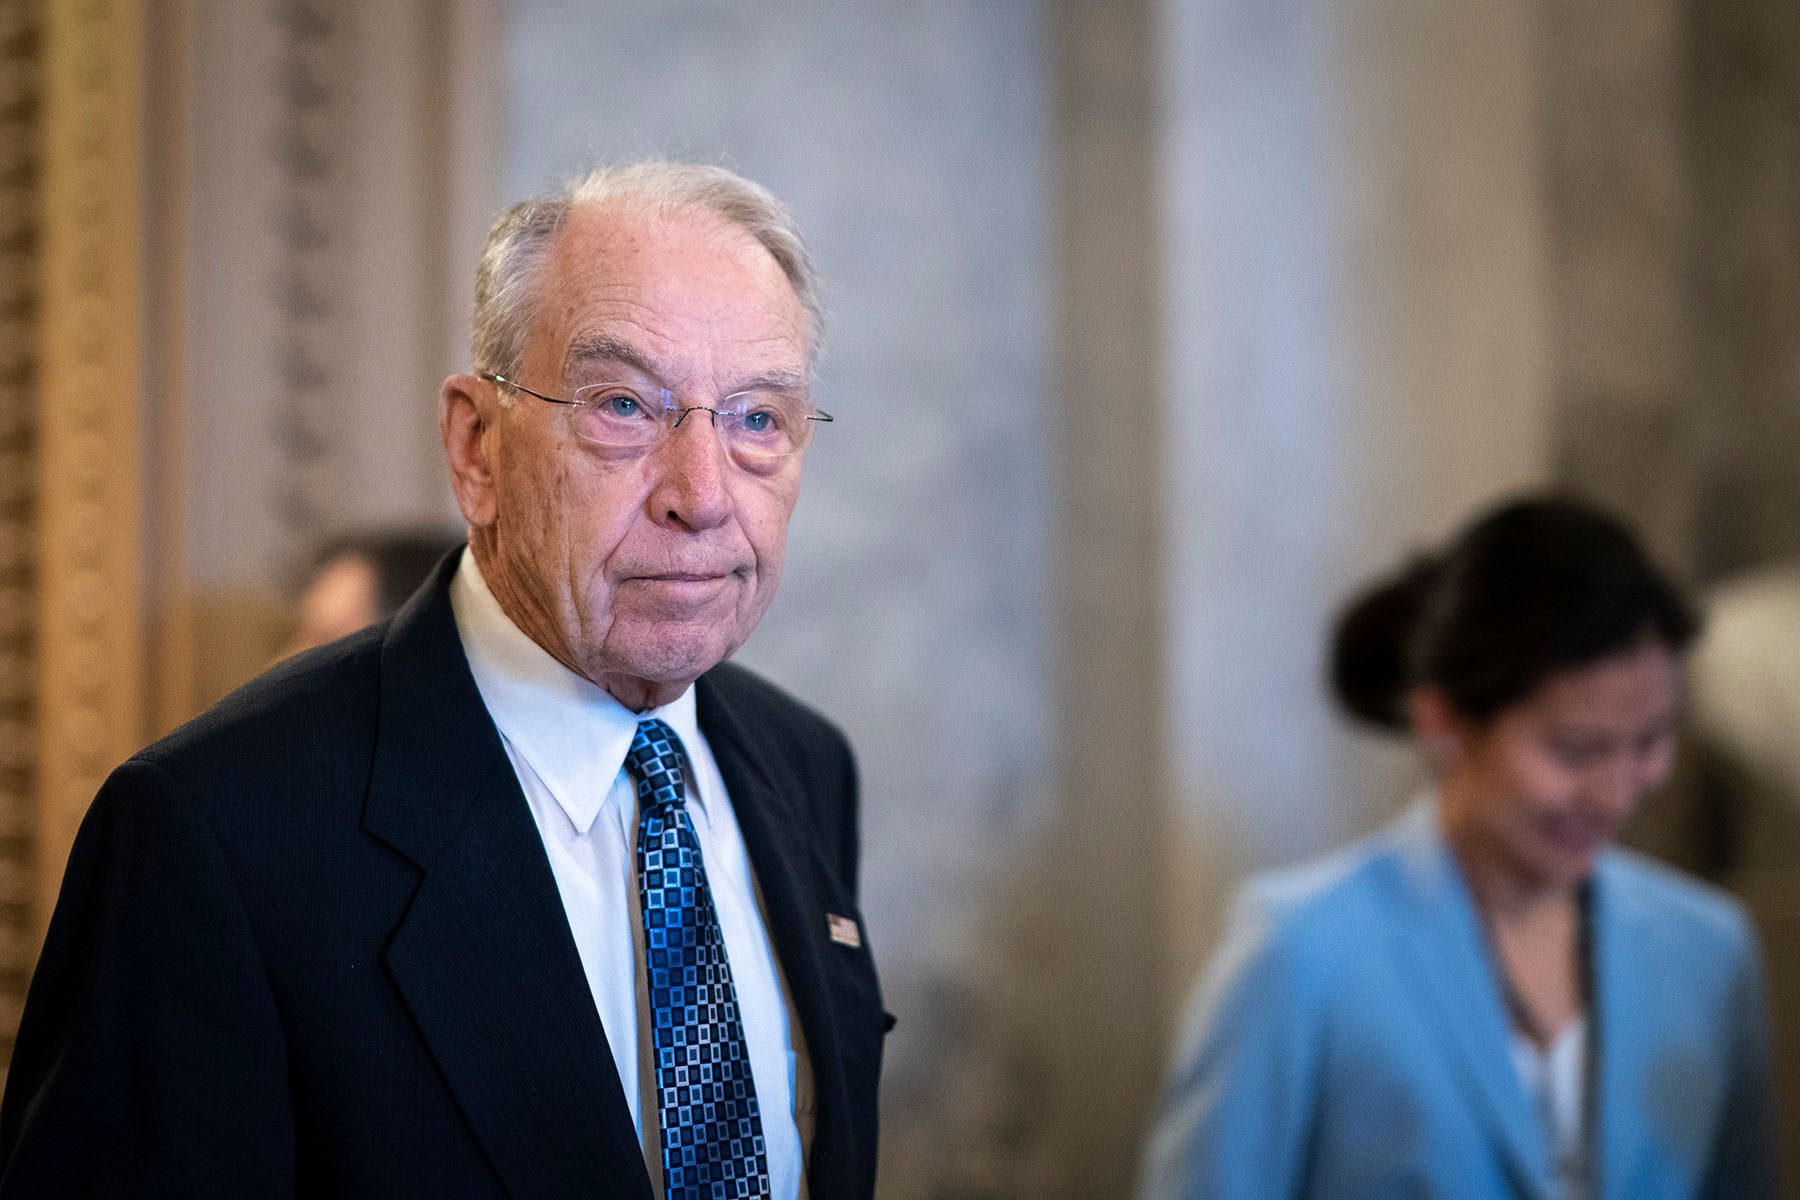 Chuck Grassley leaves the Senate Chamber at the U.S. Capitol